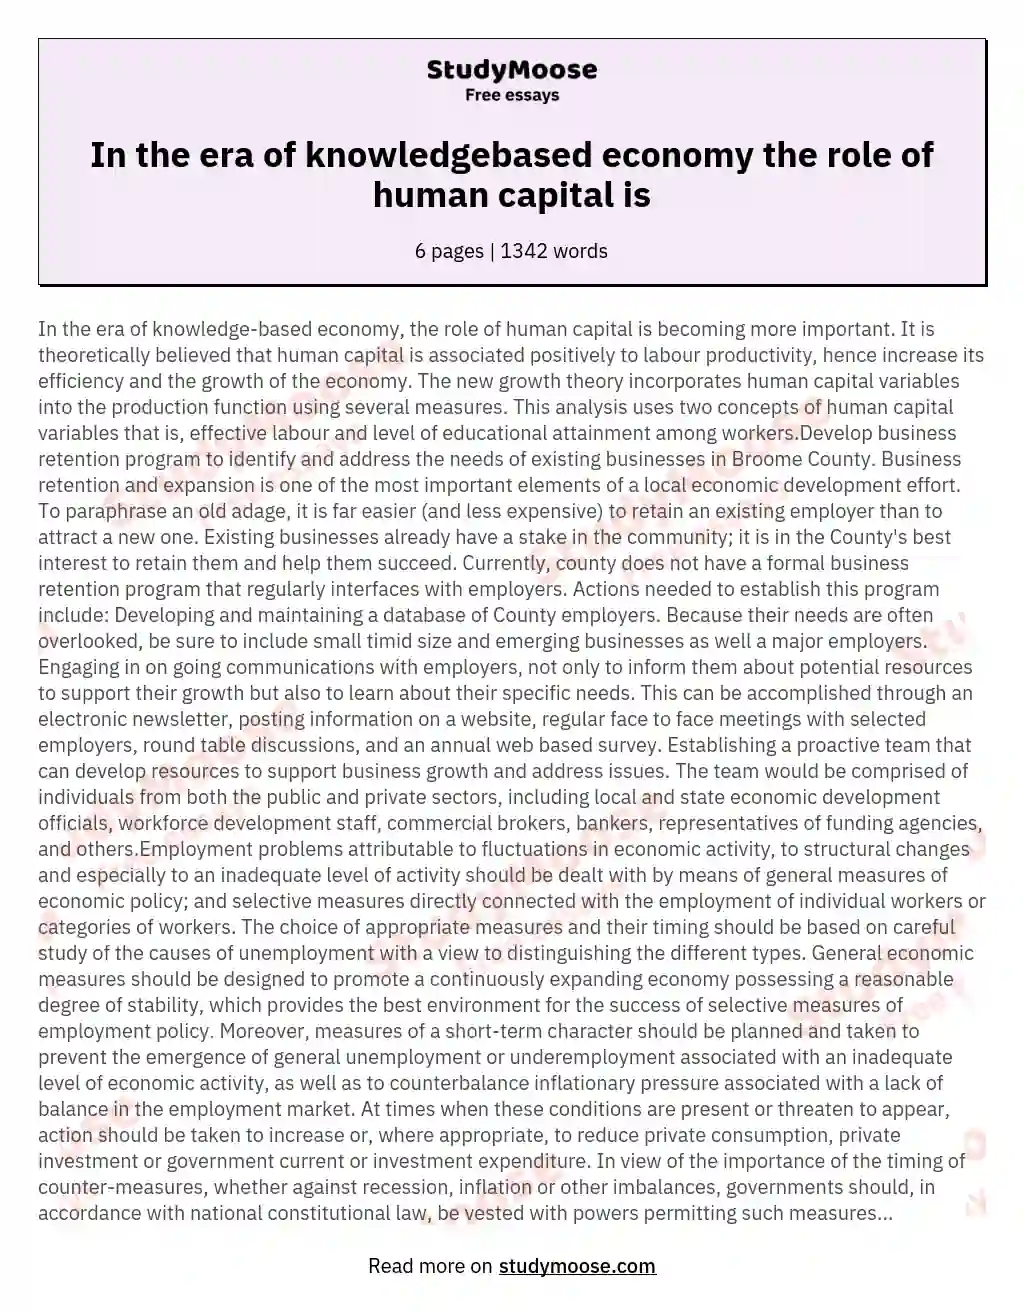 In the era of knowledgebased economy the role of human capital is essay